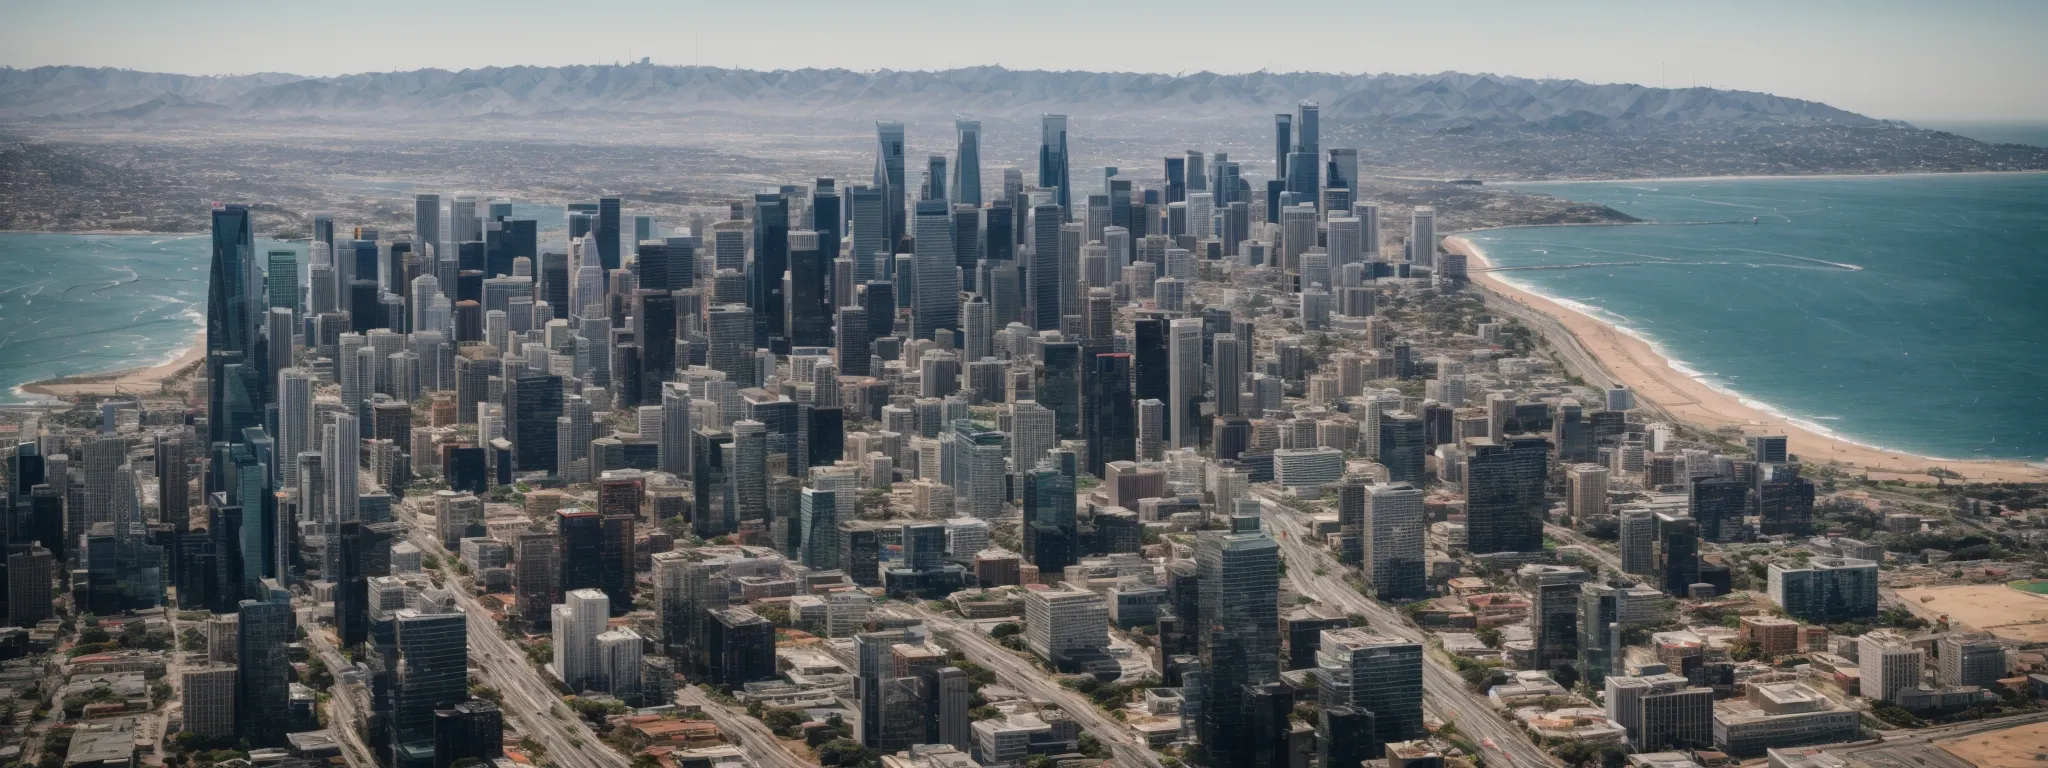 a panoramic view of the california skyline blending tech hub skyscrapers with the vast expanse of the pacific ocean.